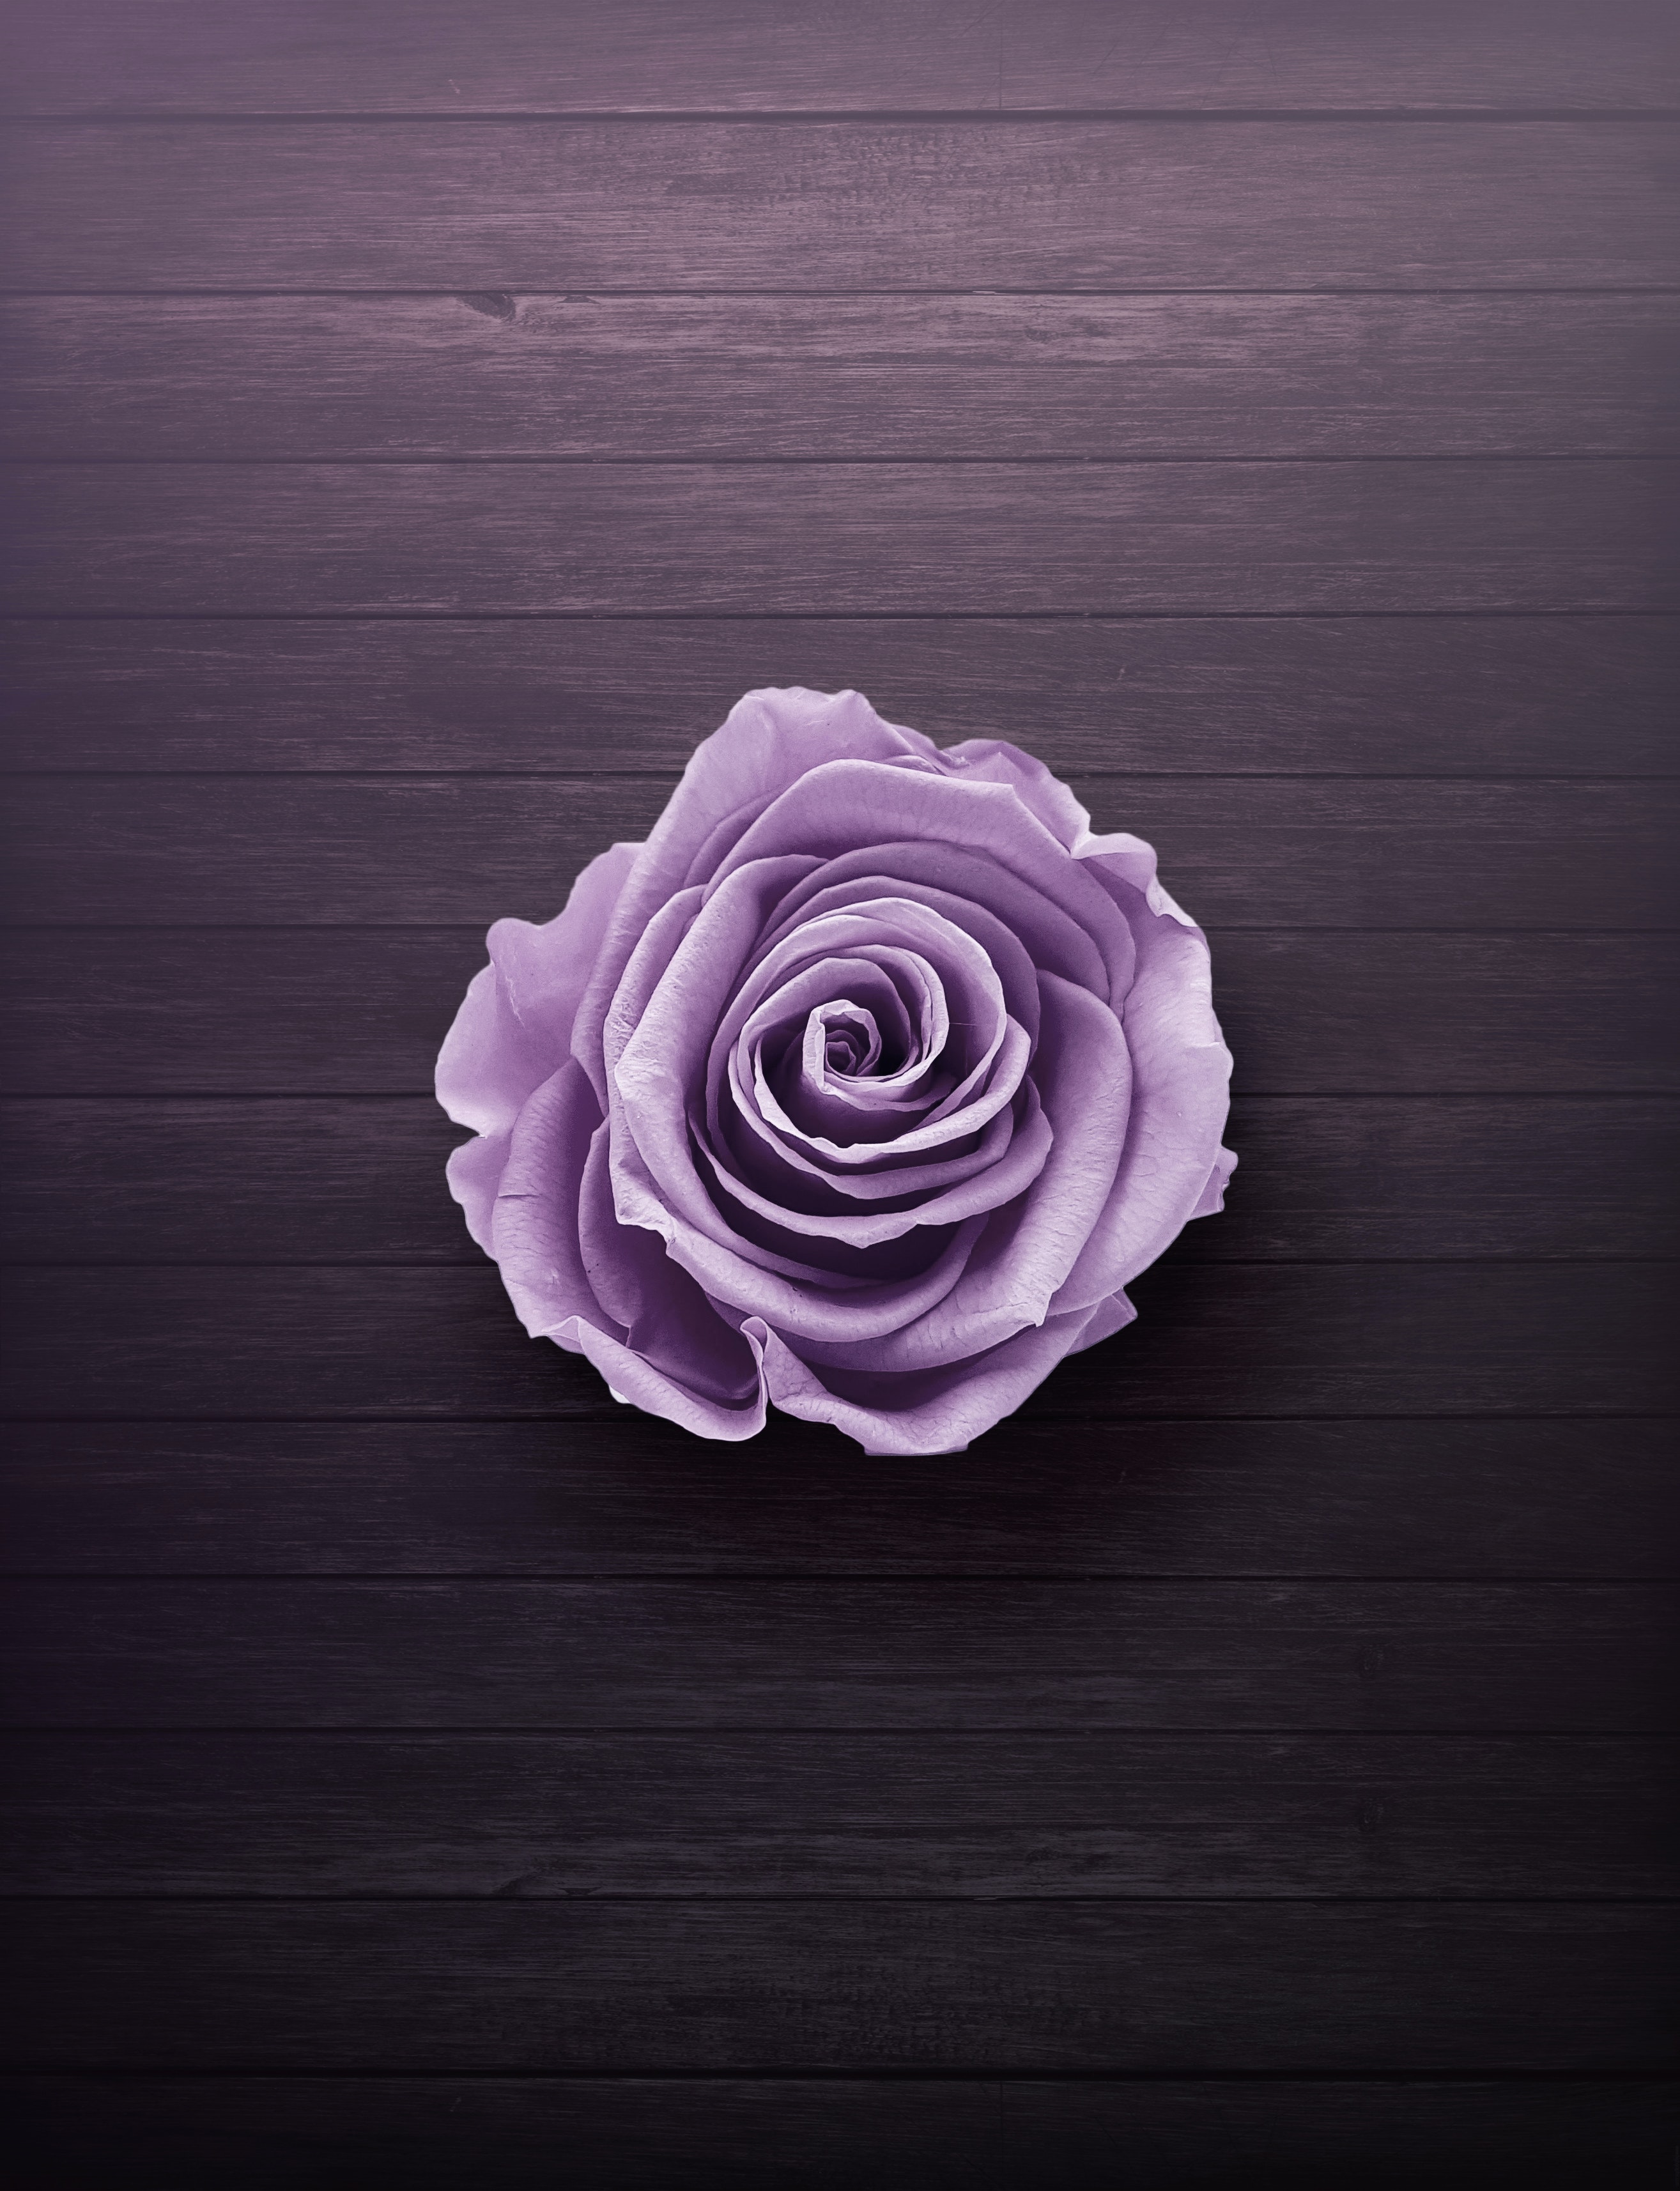 Detail Pictures Of Roses To Download Free Nomer 30